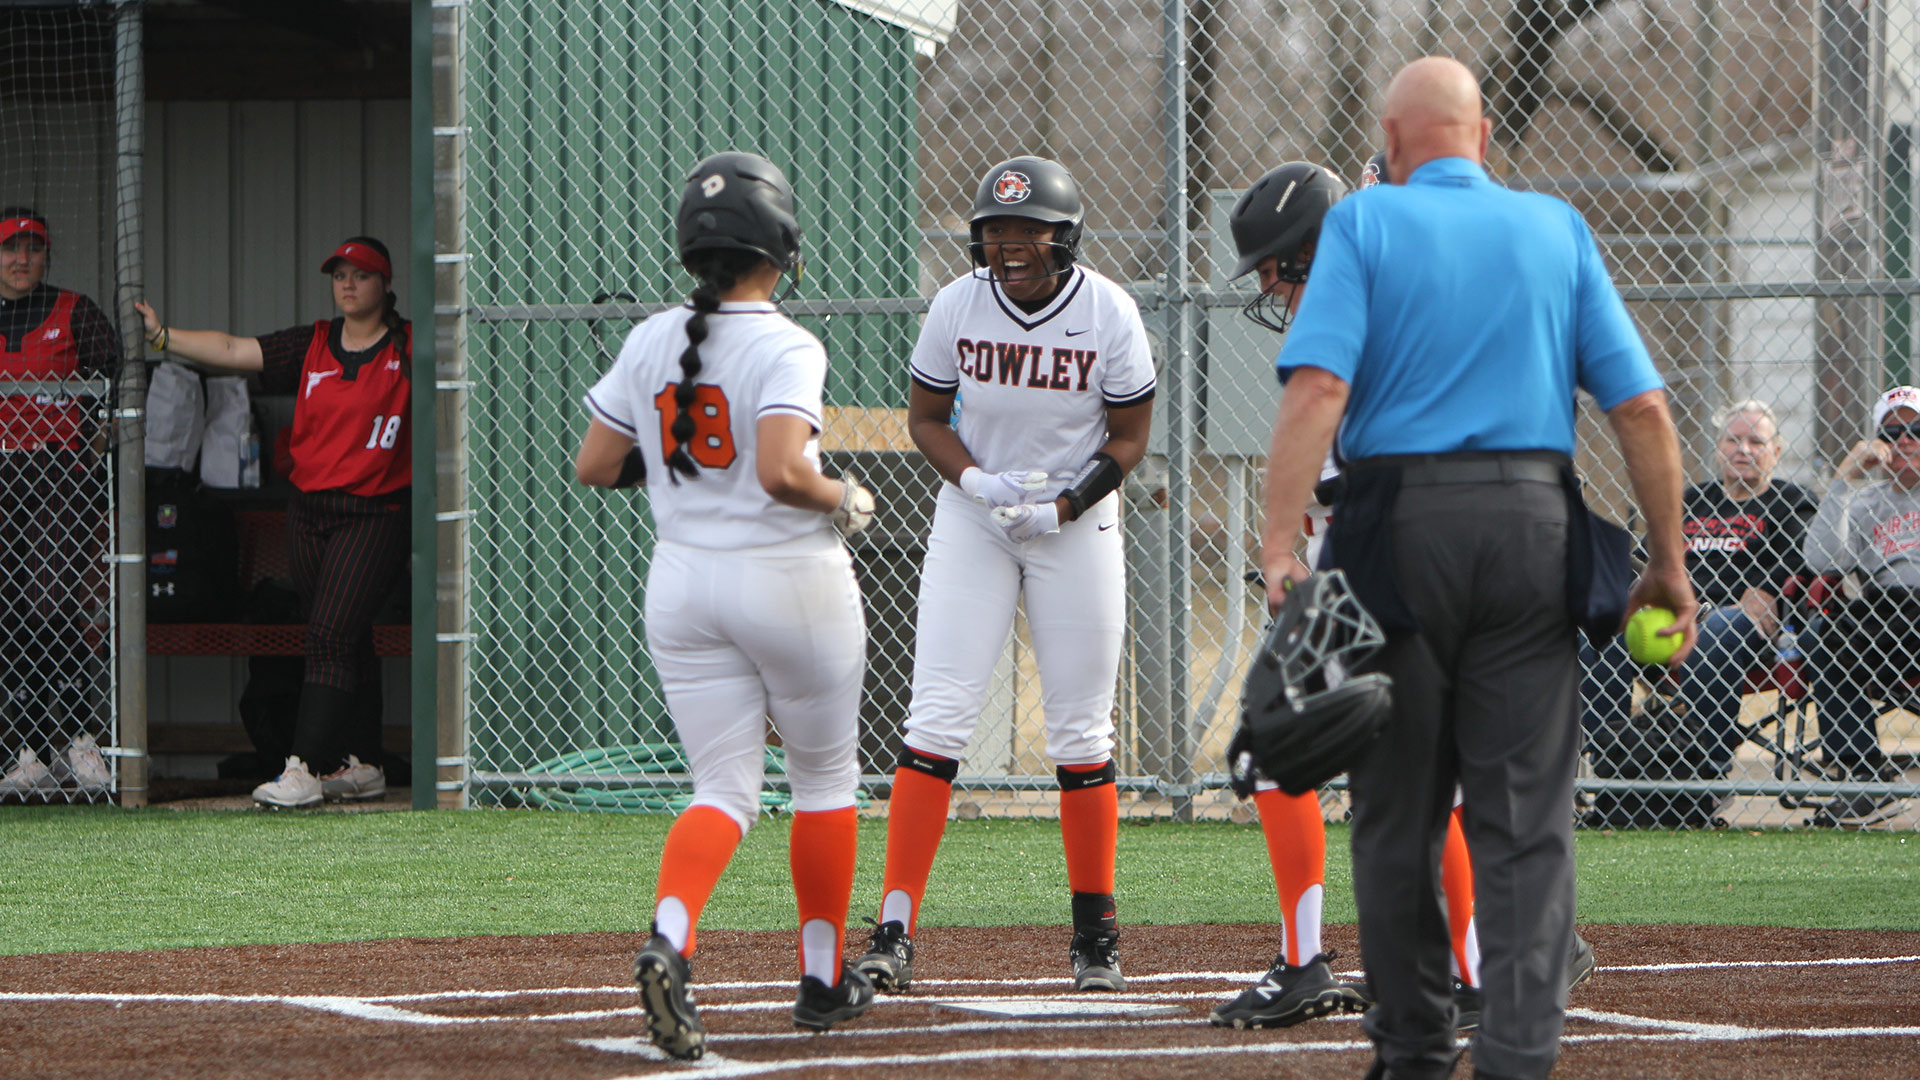 Lady Tigers rally to earn split of home doubleheader